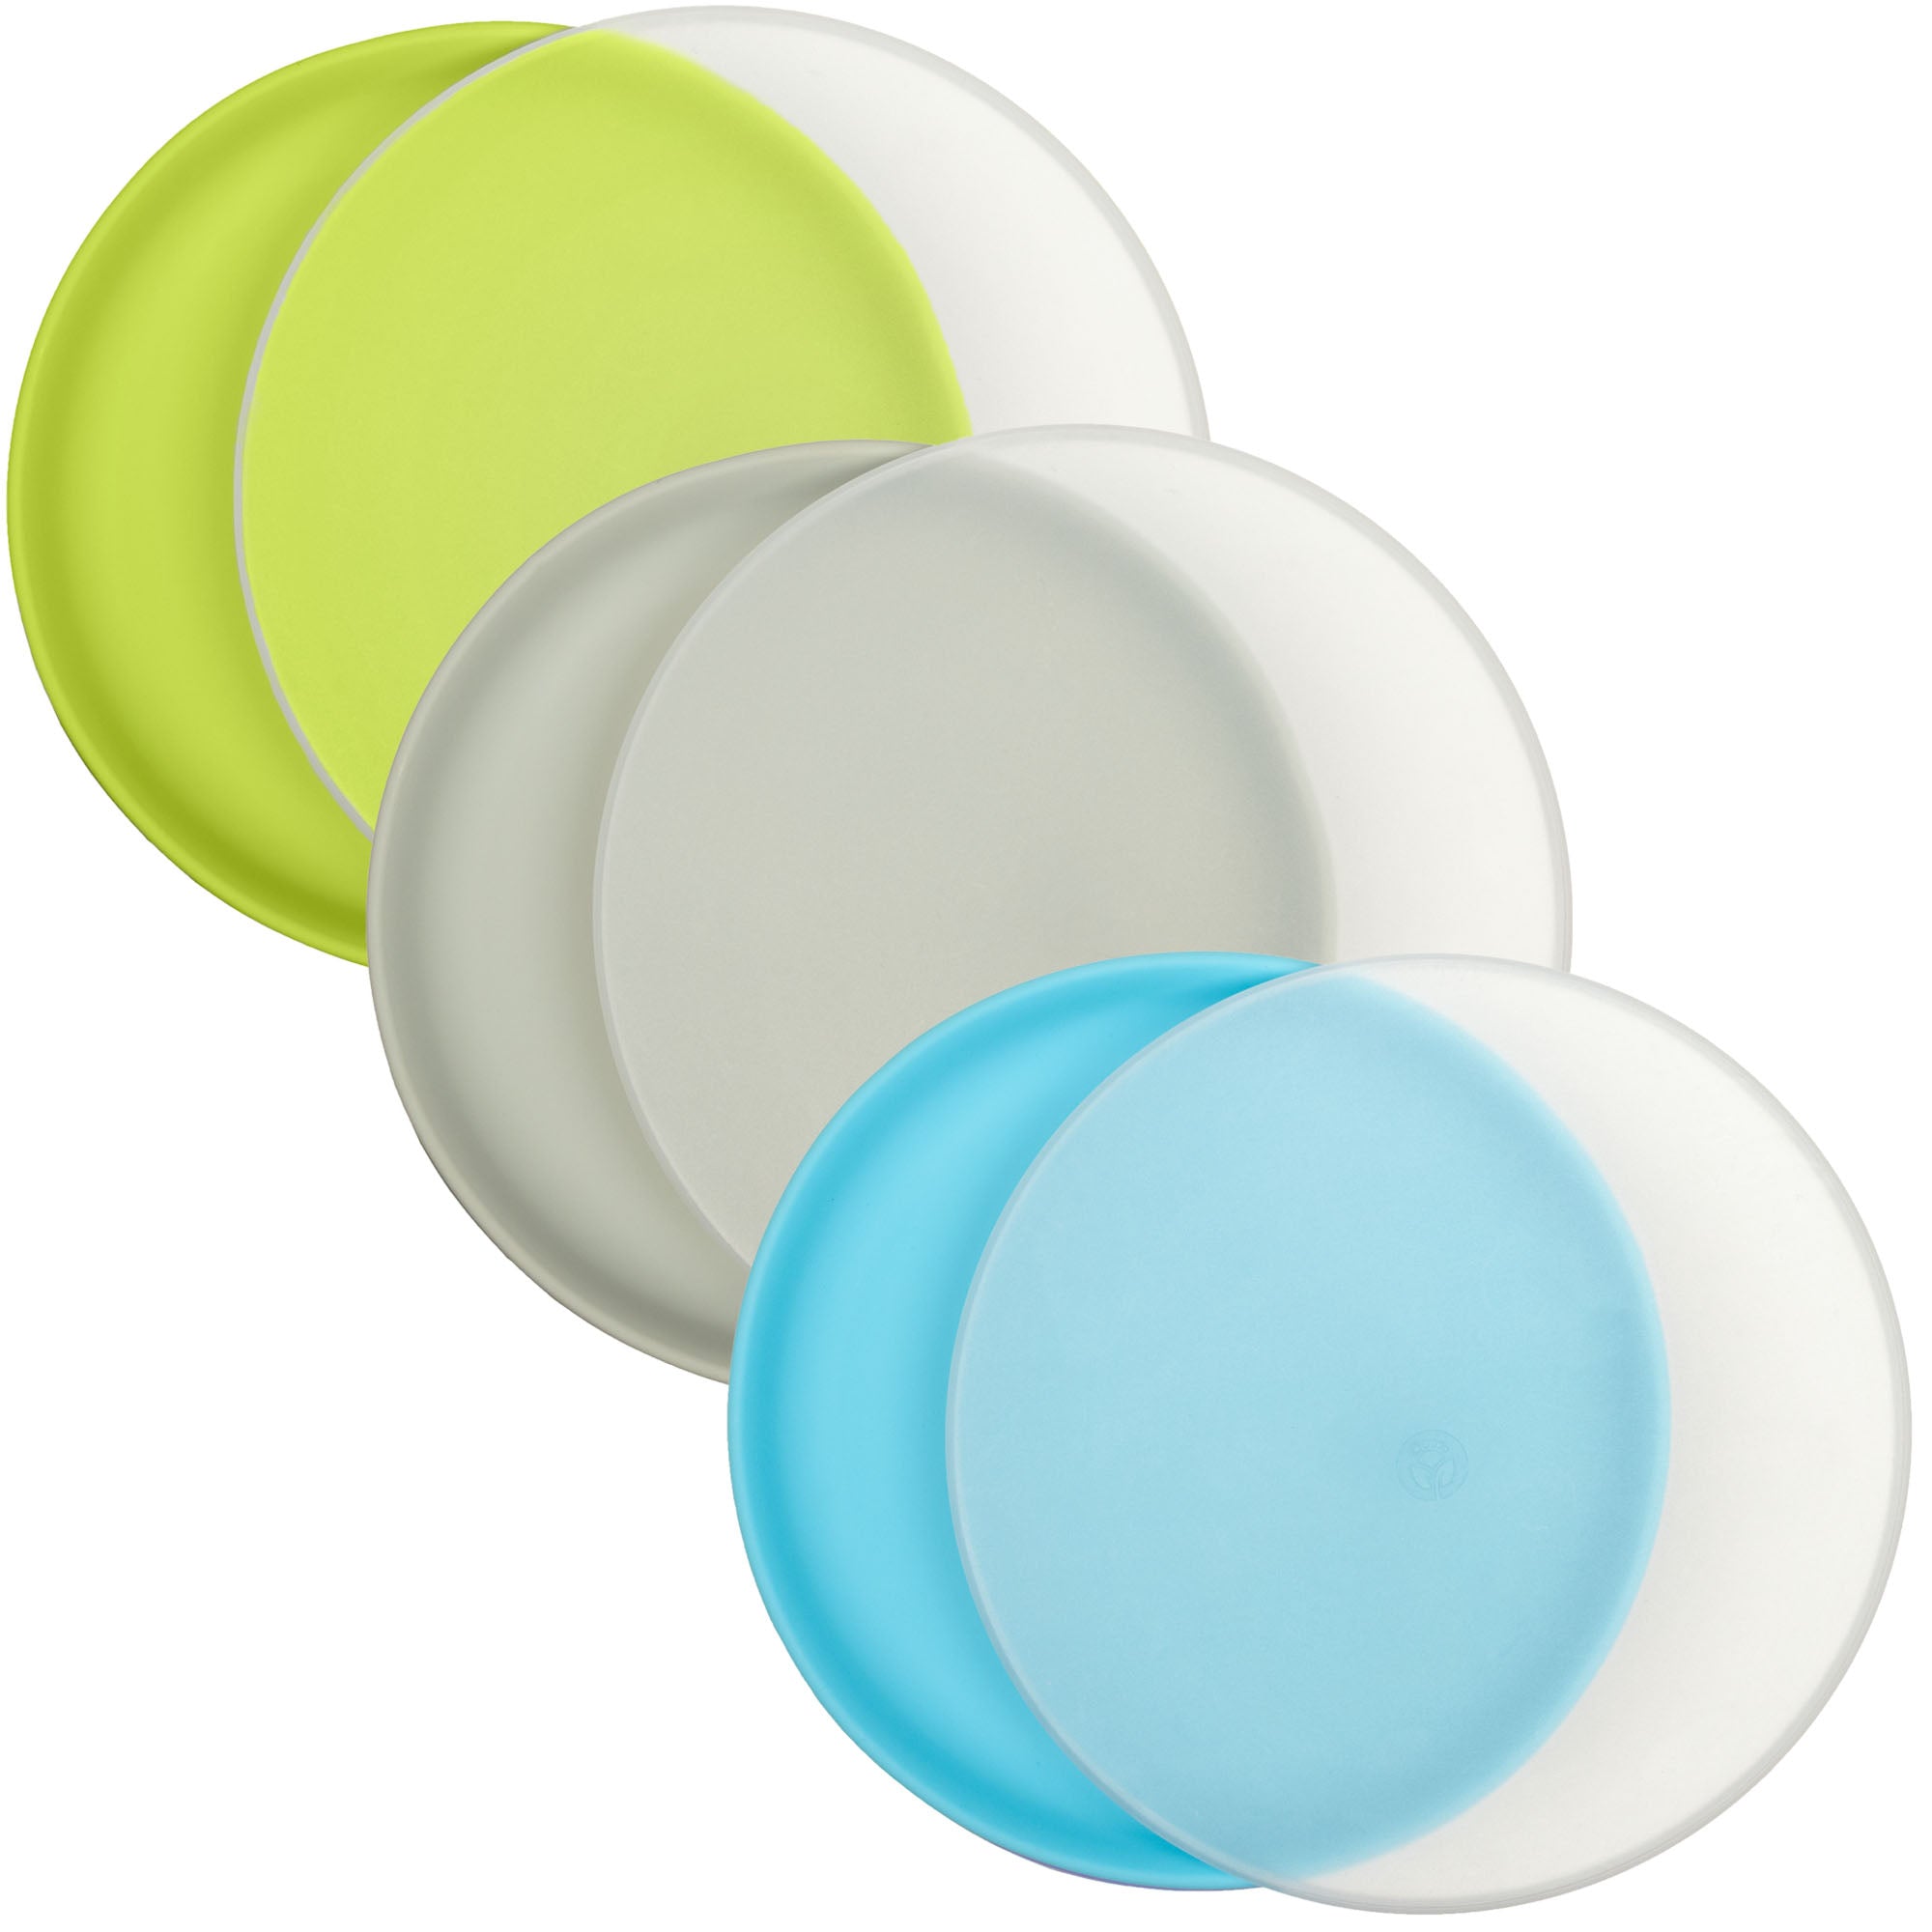 WeeSprout Suction Plates for Babies & Toddlers - 100% Silicone, Plates Stay Put with Suction Feature, Divided Design for Picky E